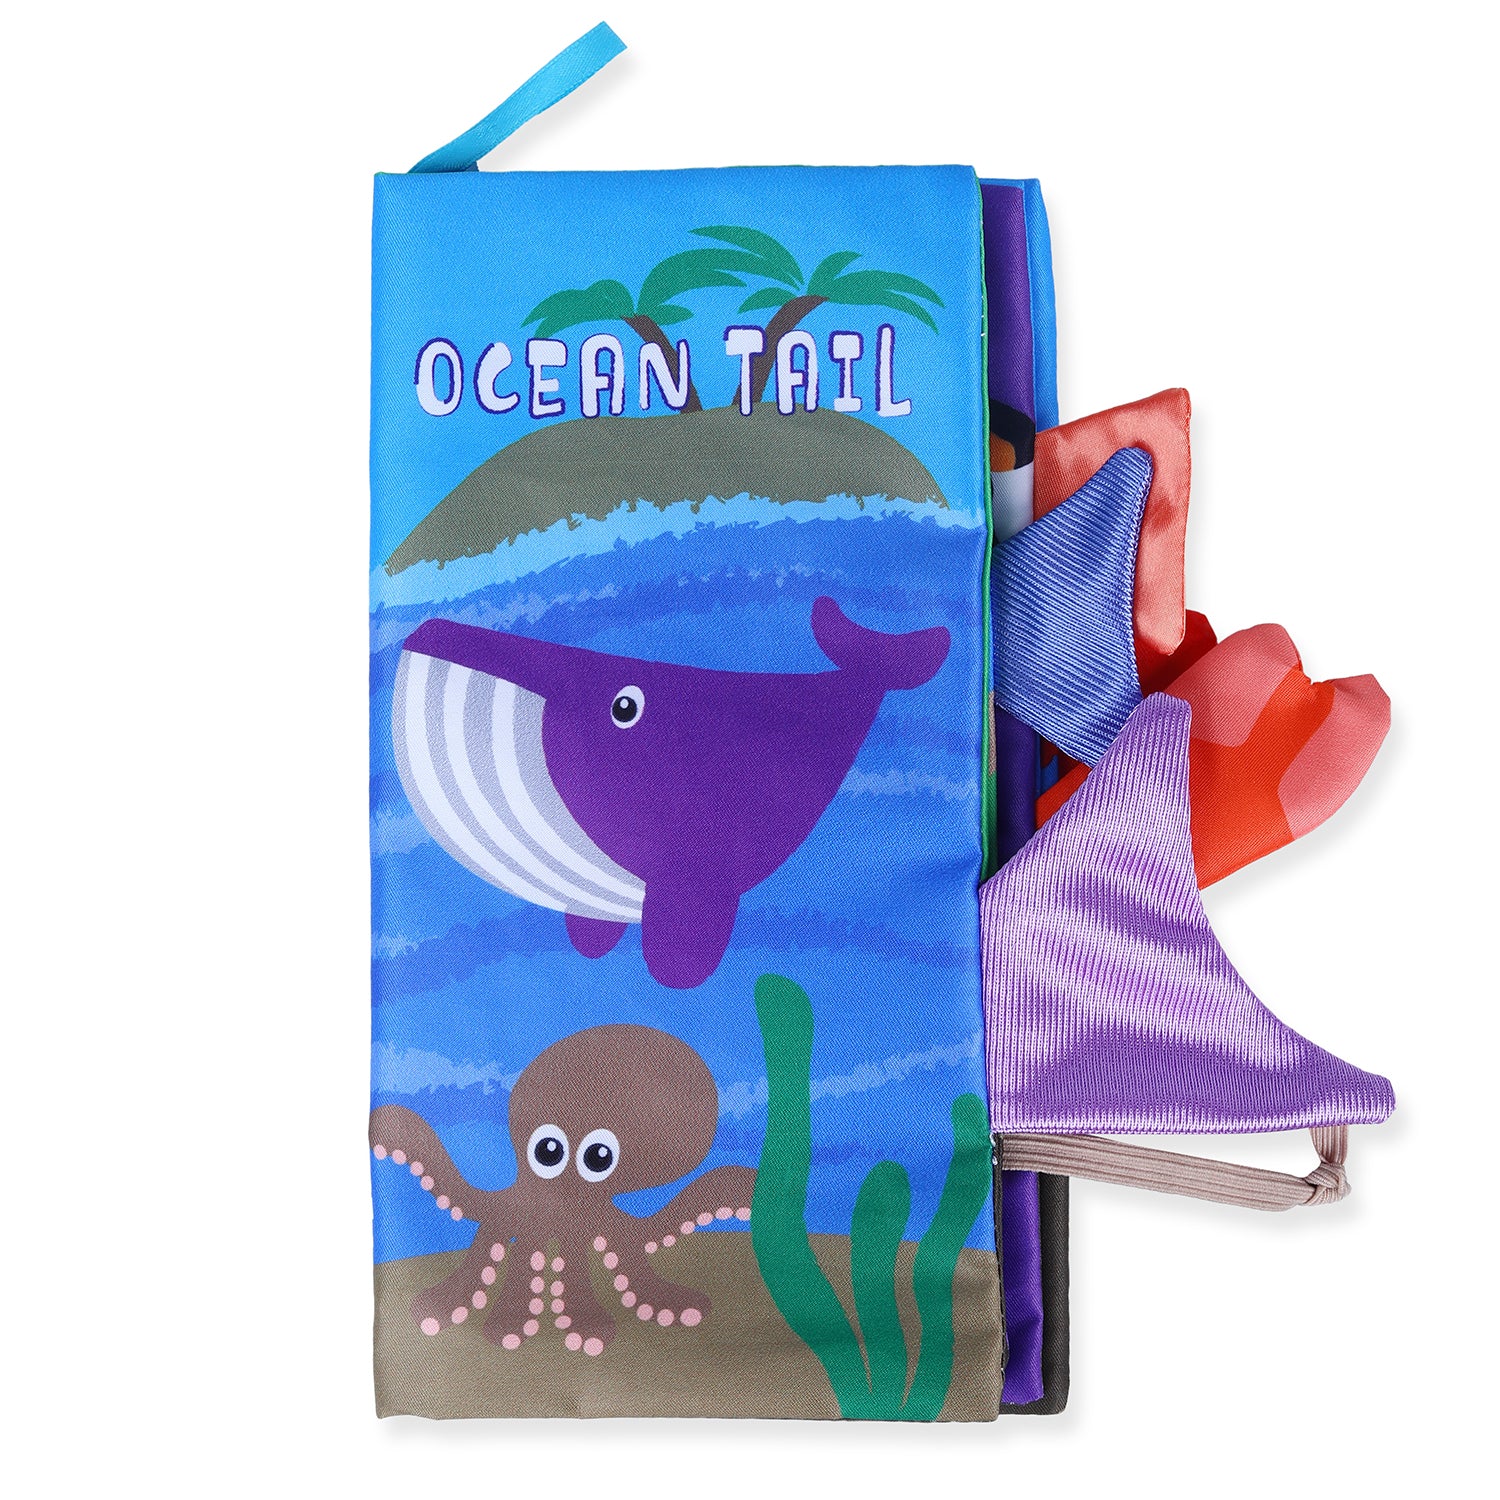 Ocean Tail Early Children Sensory Development Interactive 3D Cloth Book With Rustle Paper - Multicolour - Baby Moo